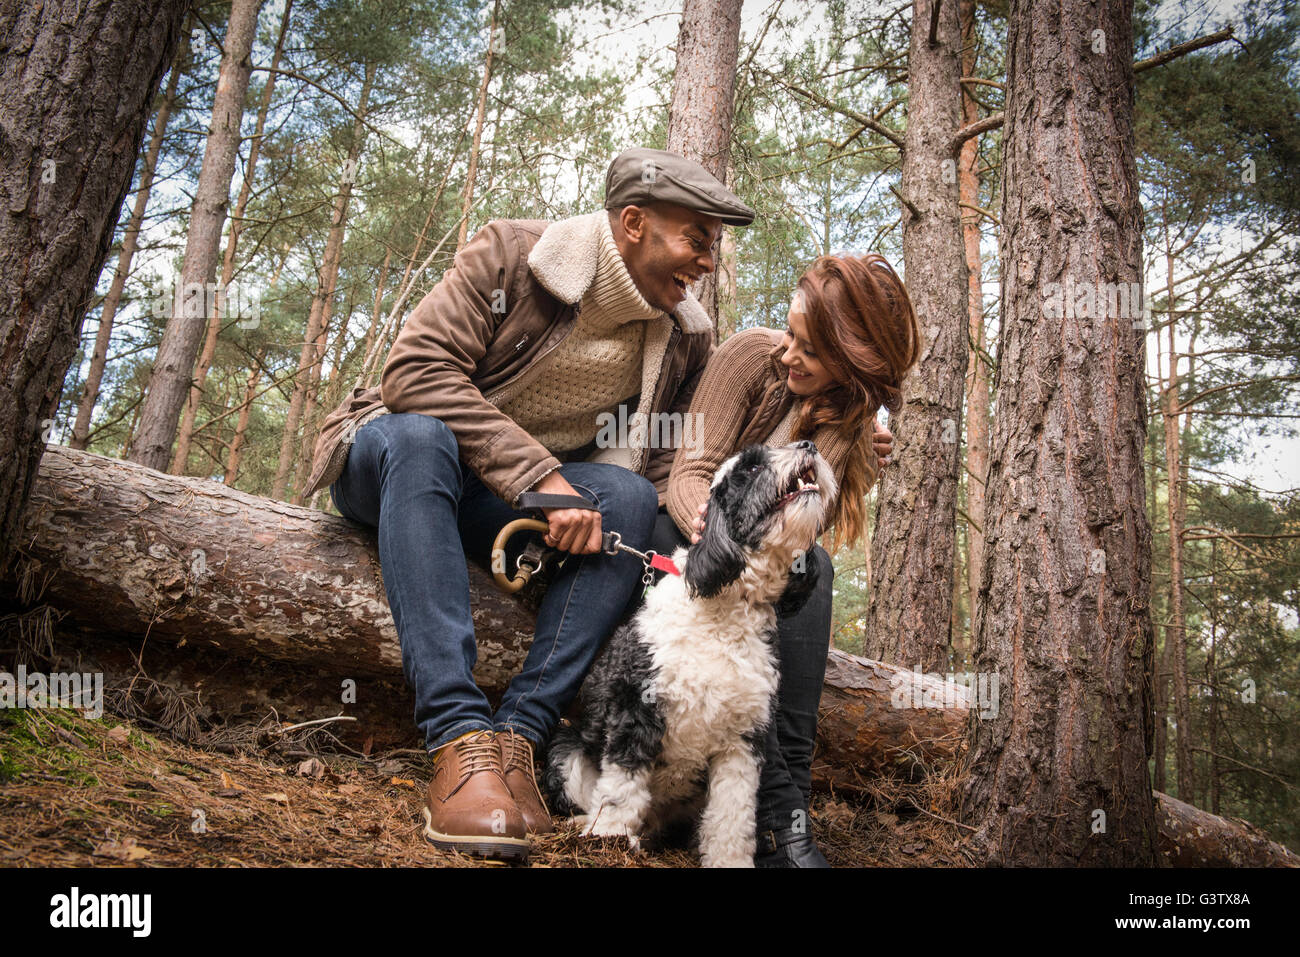 A young couple sitting with their dog during a forest walk in Autumn. Stock Photo